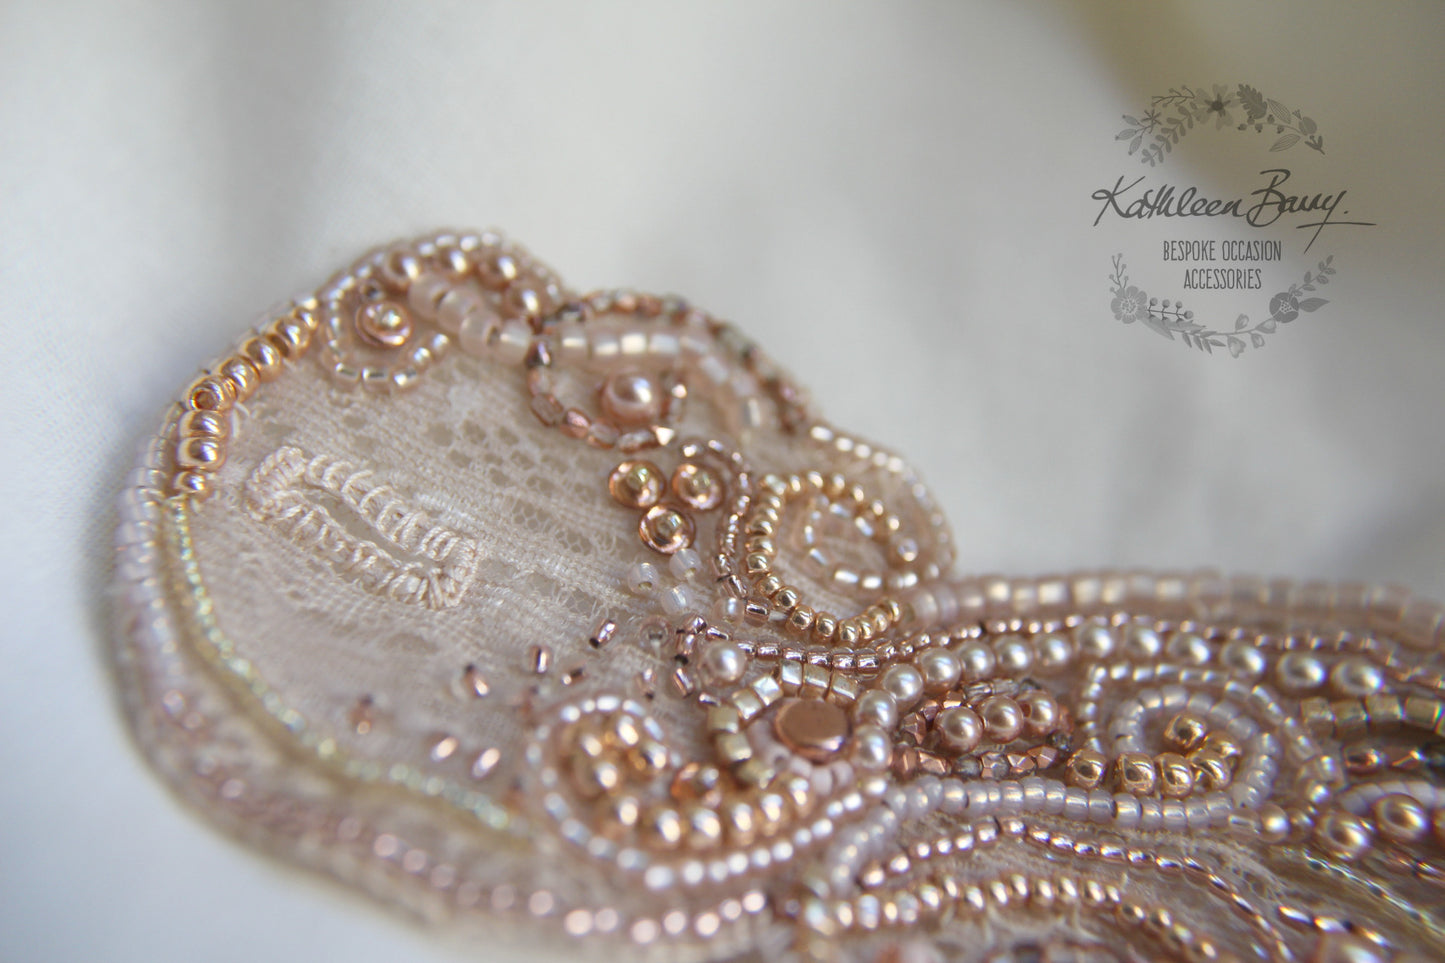 Rose gold lace cuff bracelet - pearl crystal embellished rose gold & blush pink tones - custom colors available